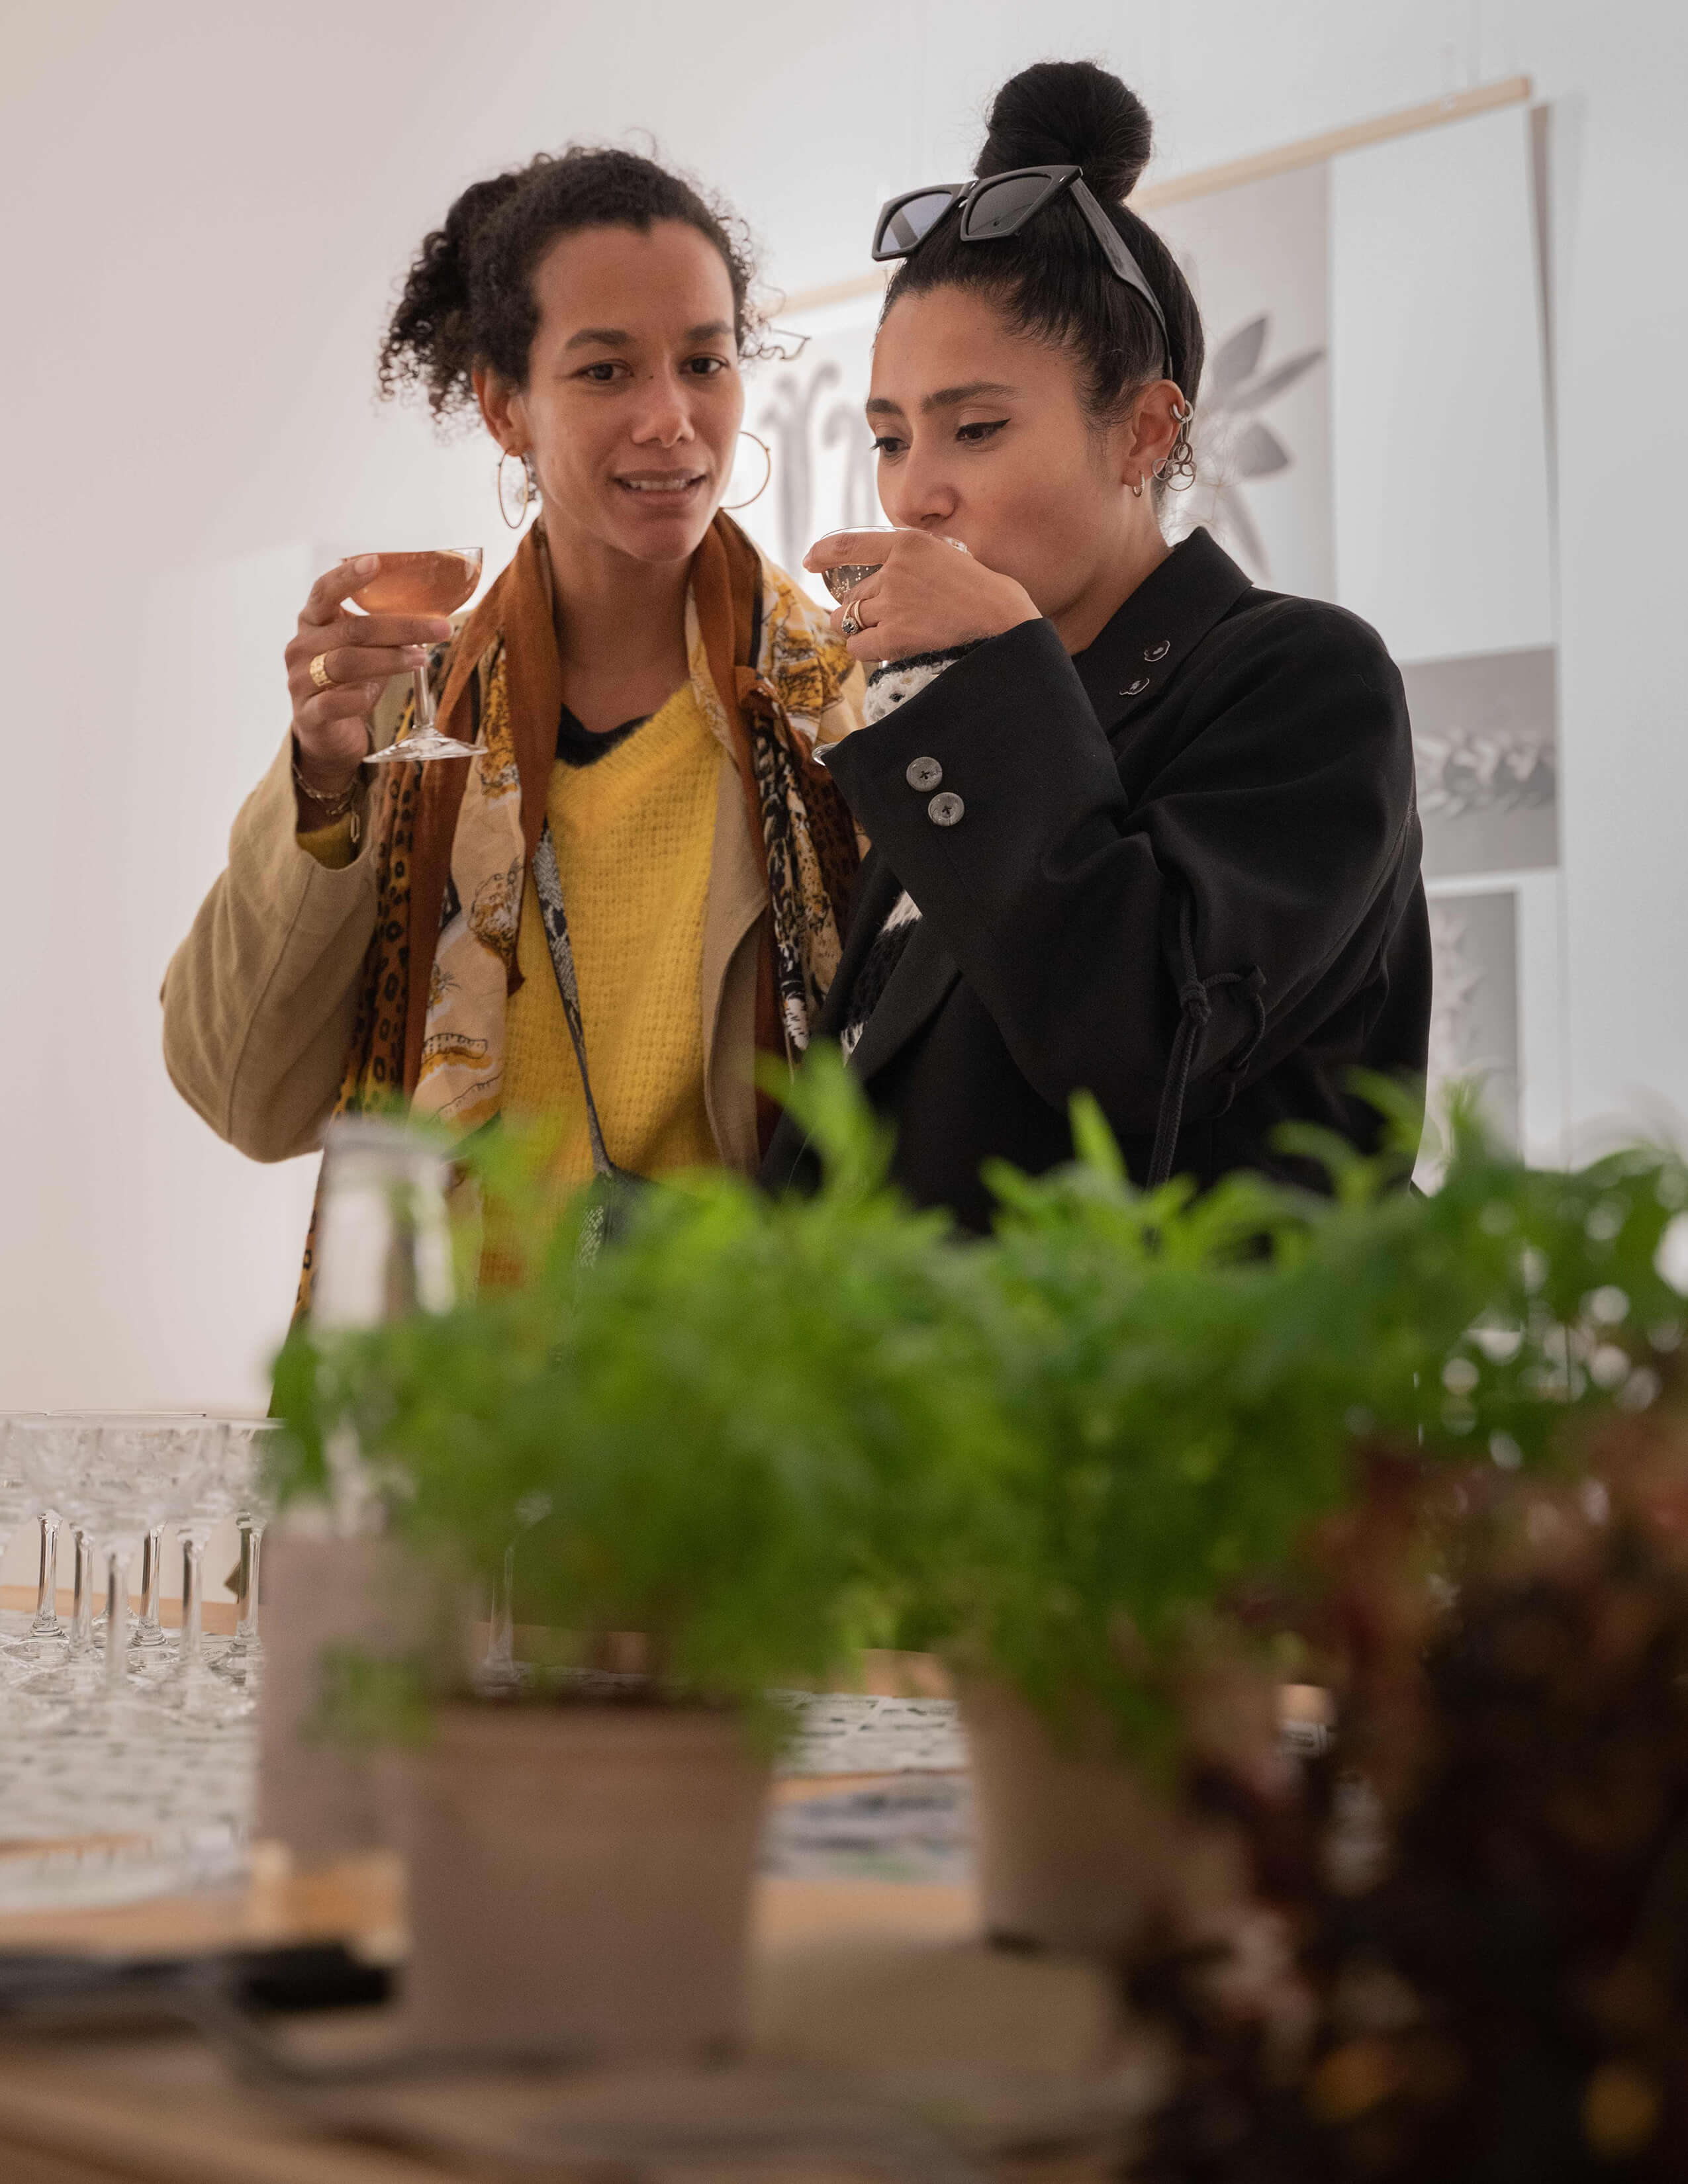 Two ladies are having their drinks while browsing plants and other stuff that was presented on the table.